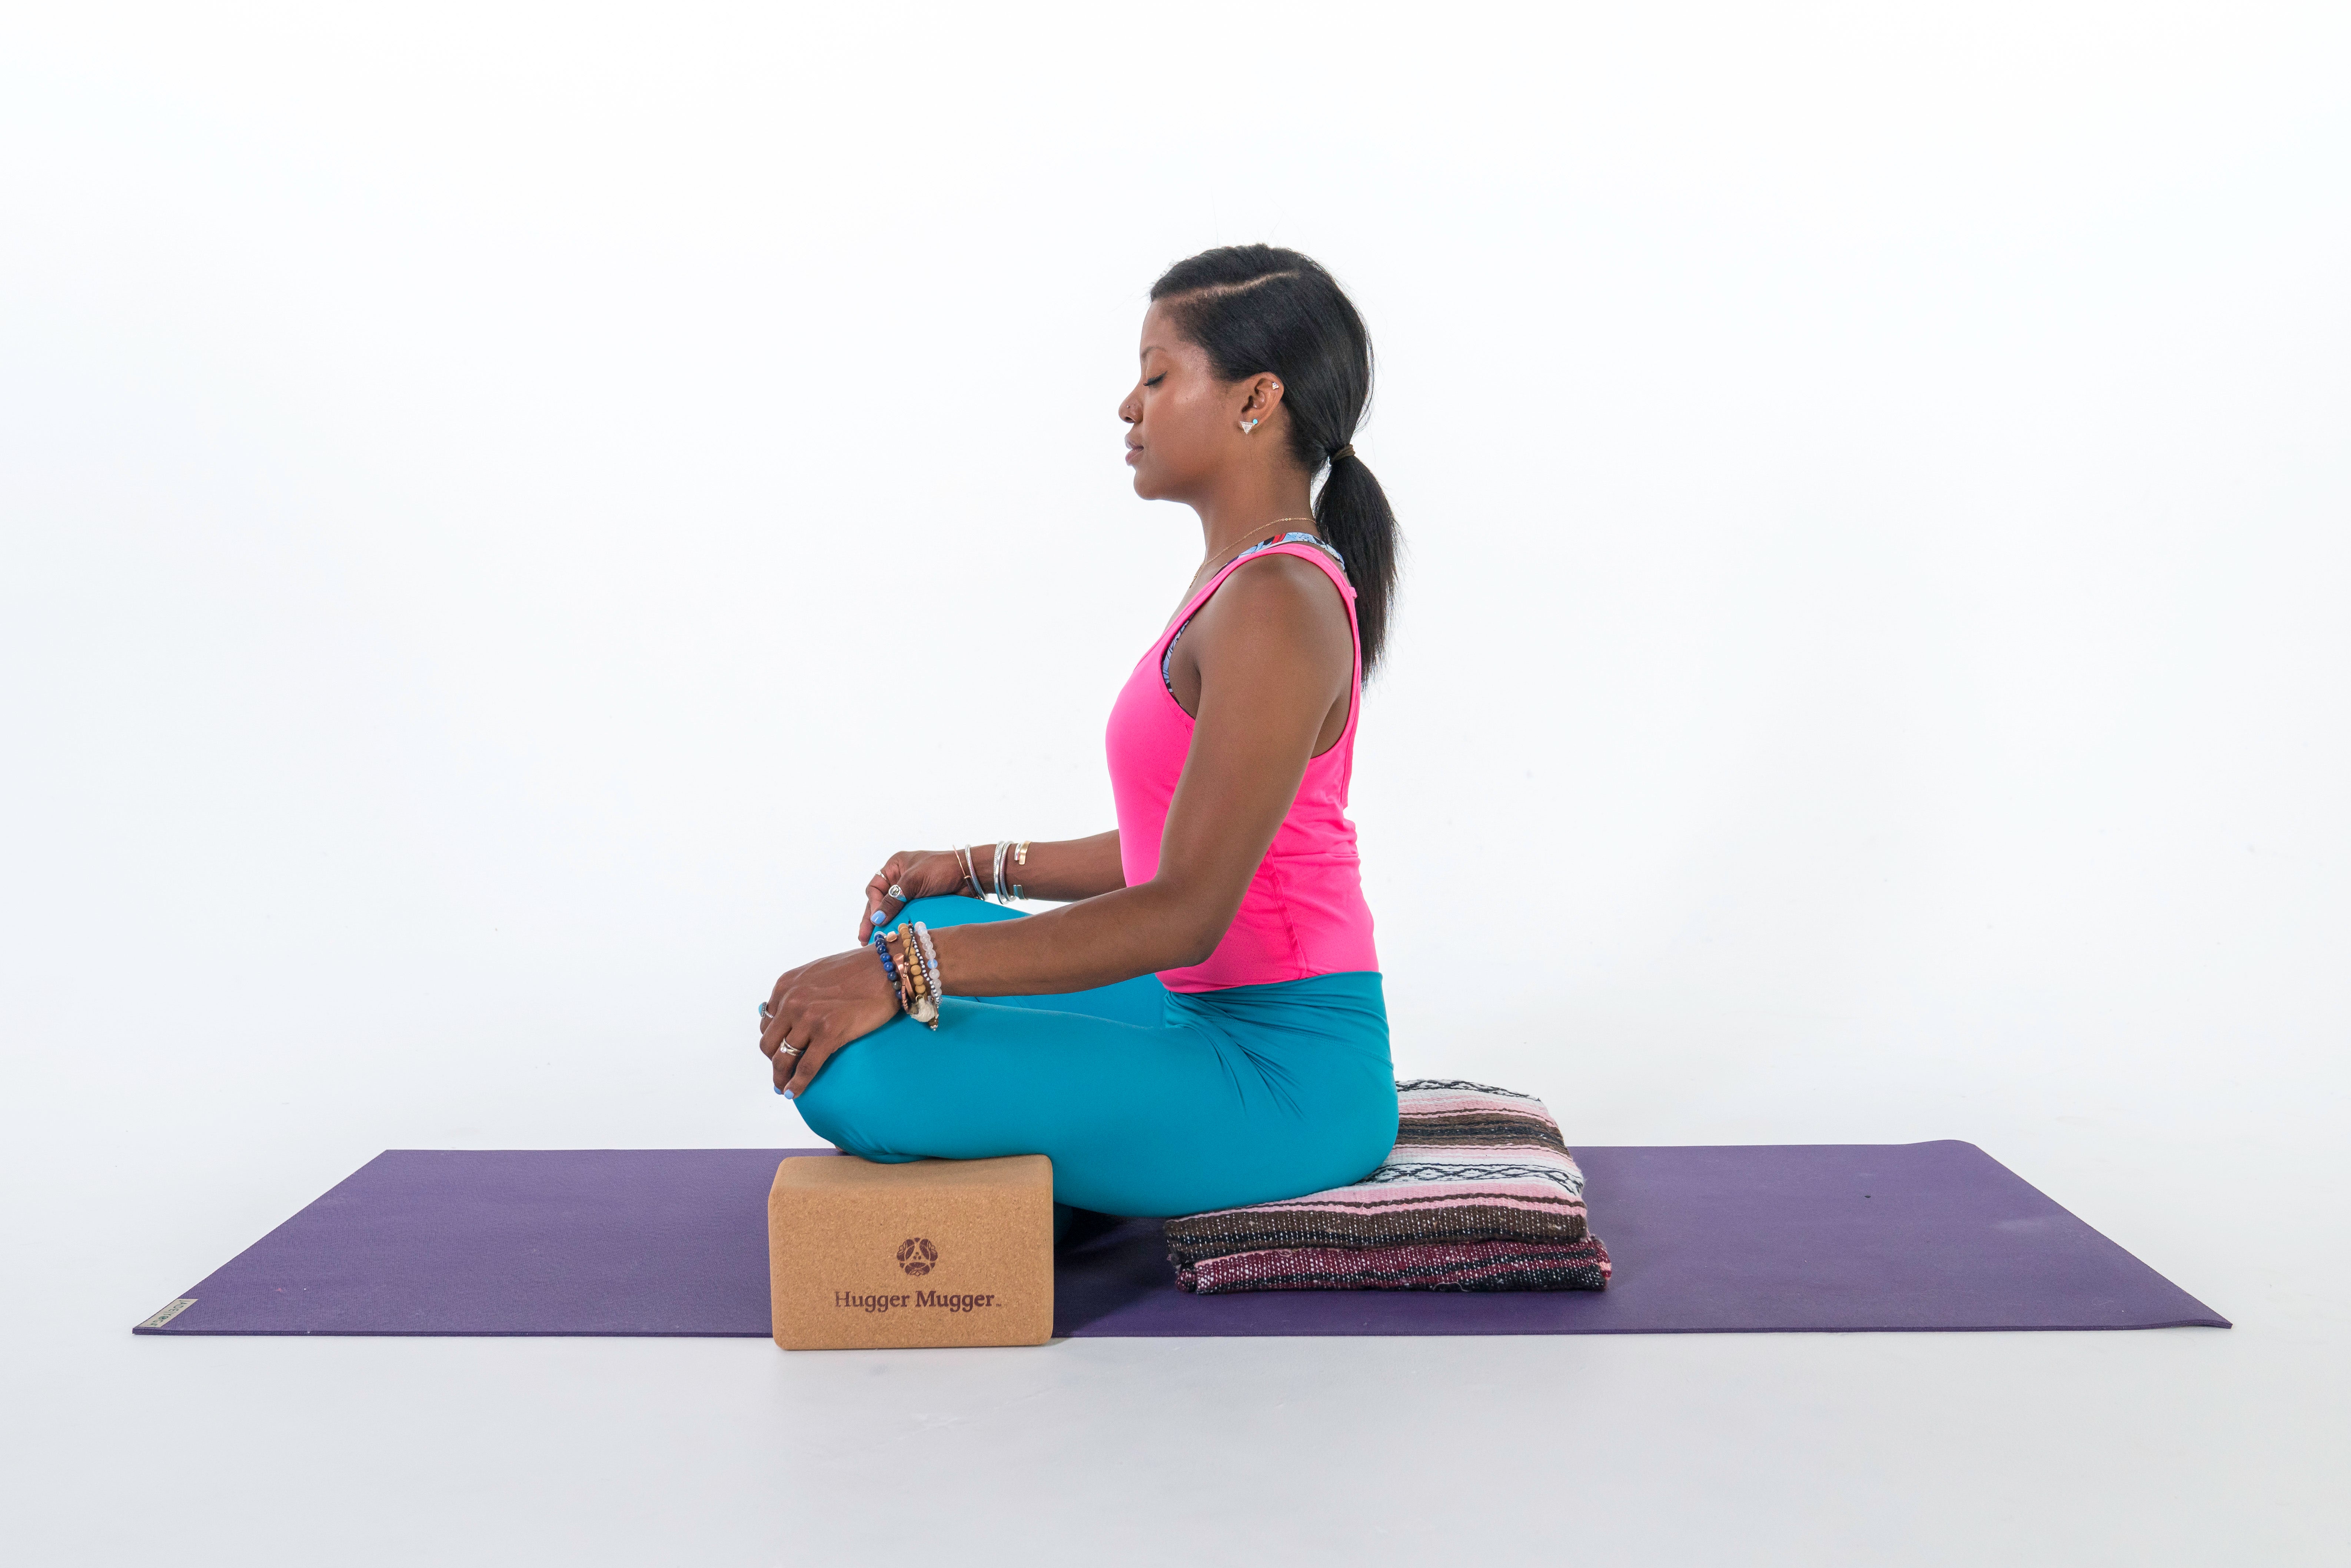 Find the Best Meditation Sitting Position for You in 2020 - TINT Yoga